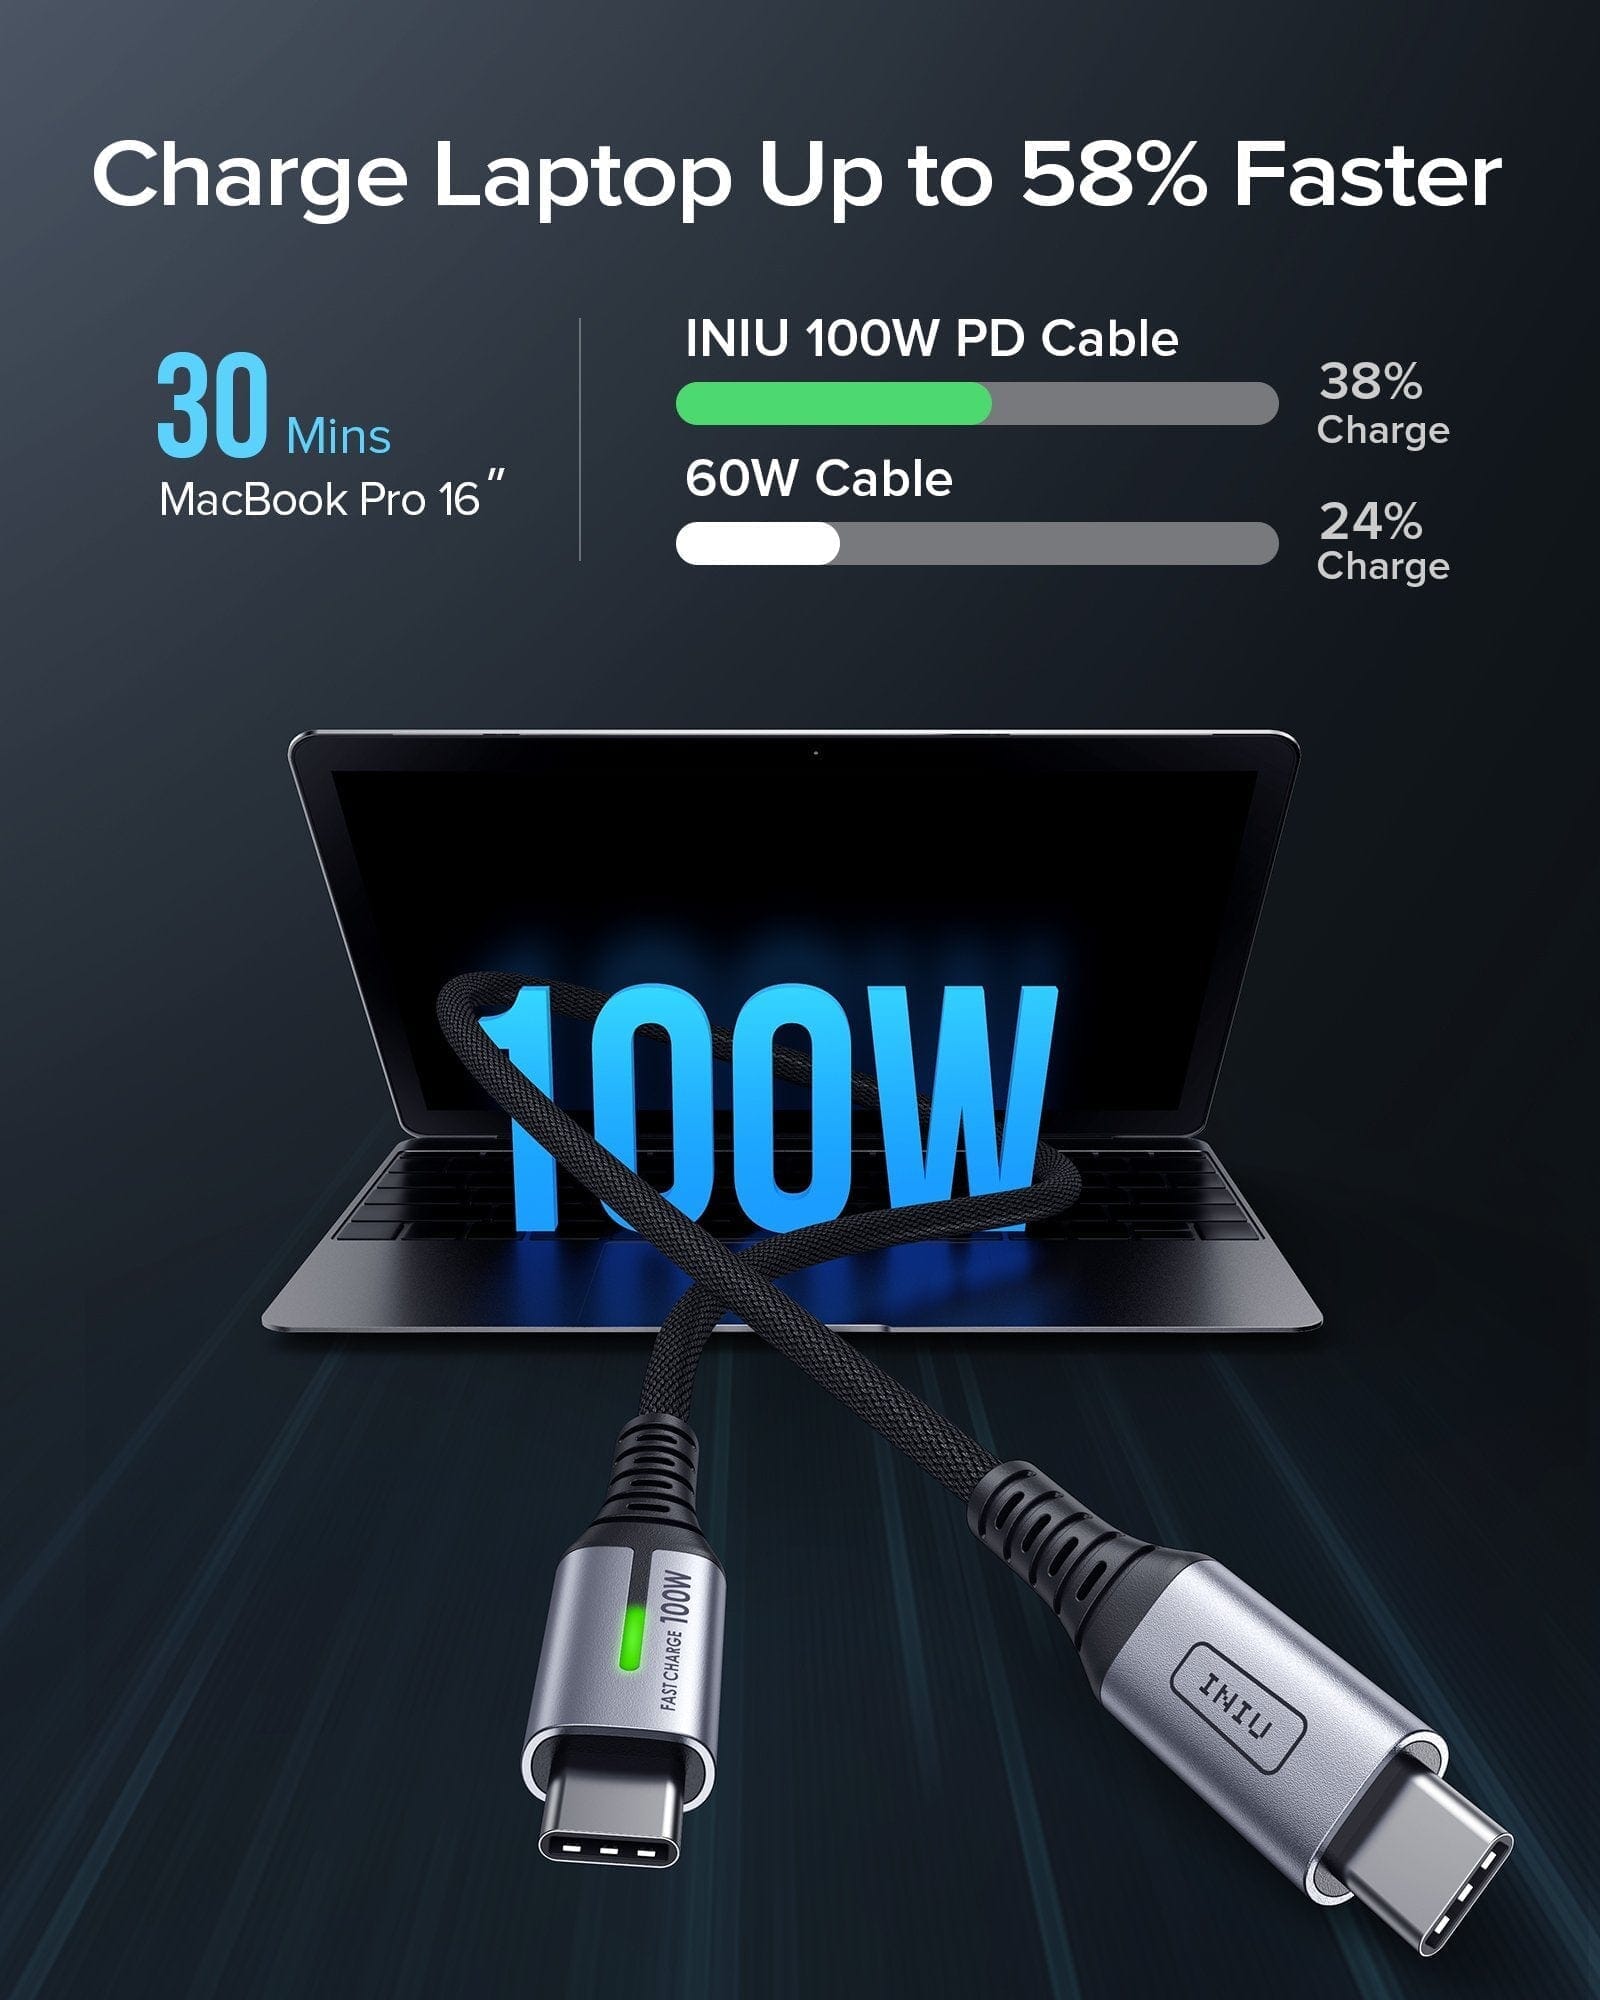 INIU 100W USB C to USB C Cable charge Laptop Up to 58% Faster